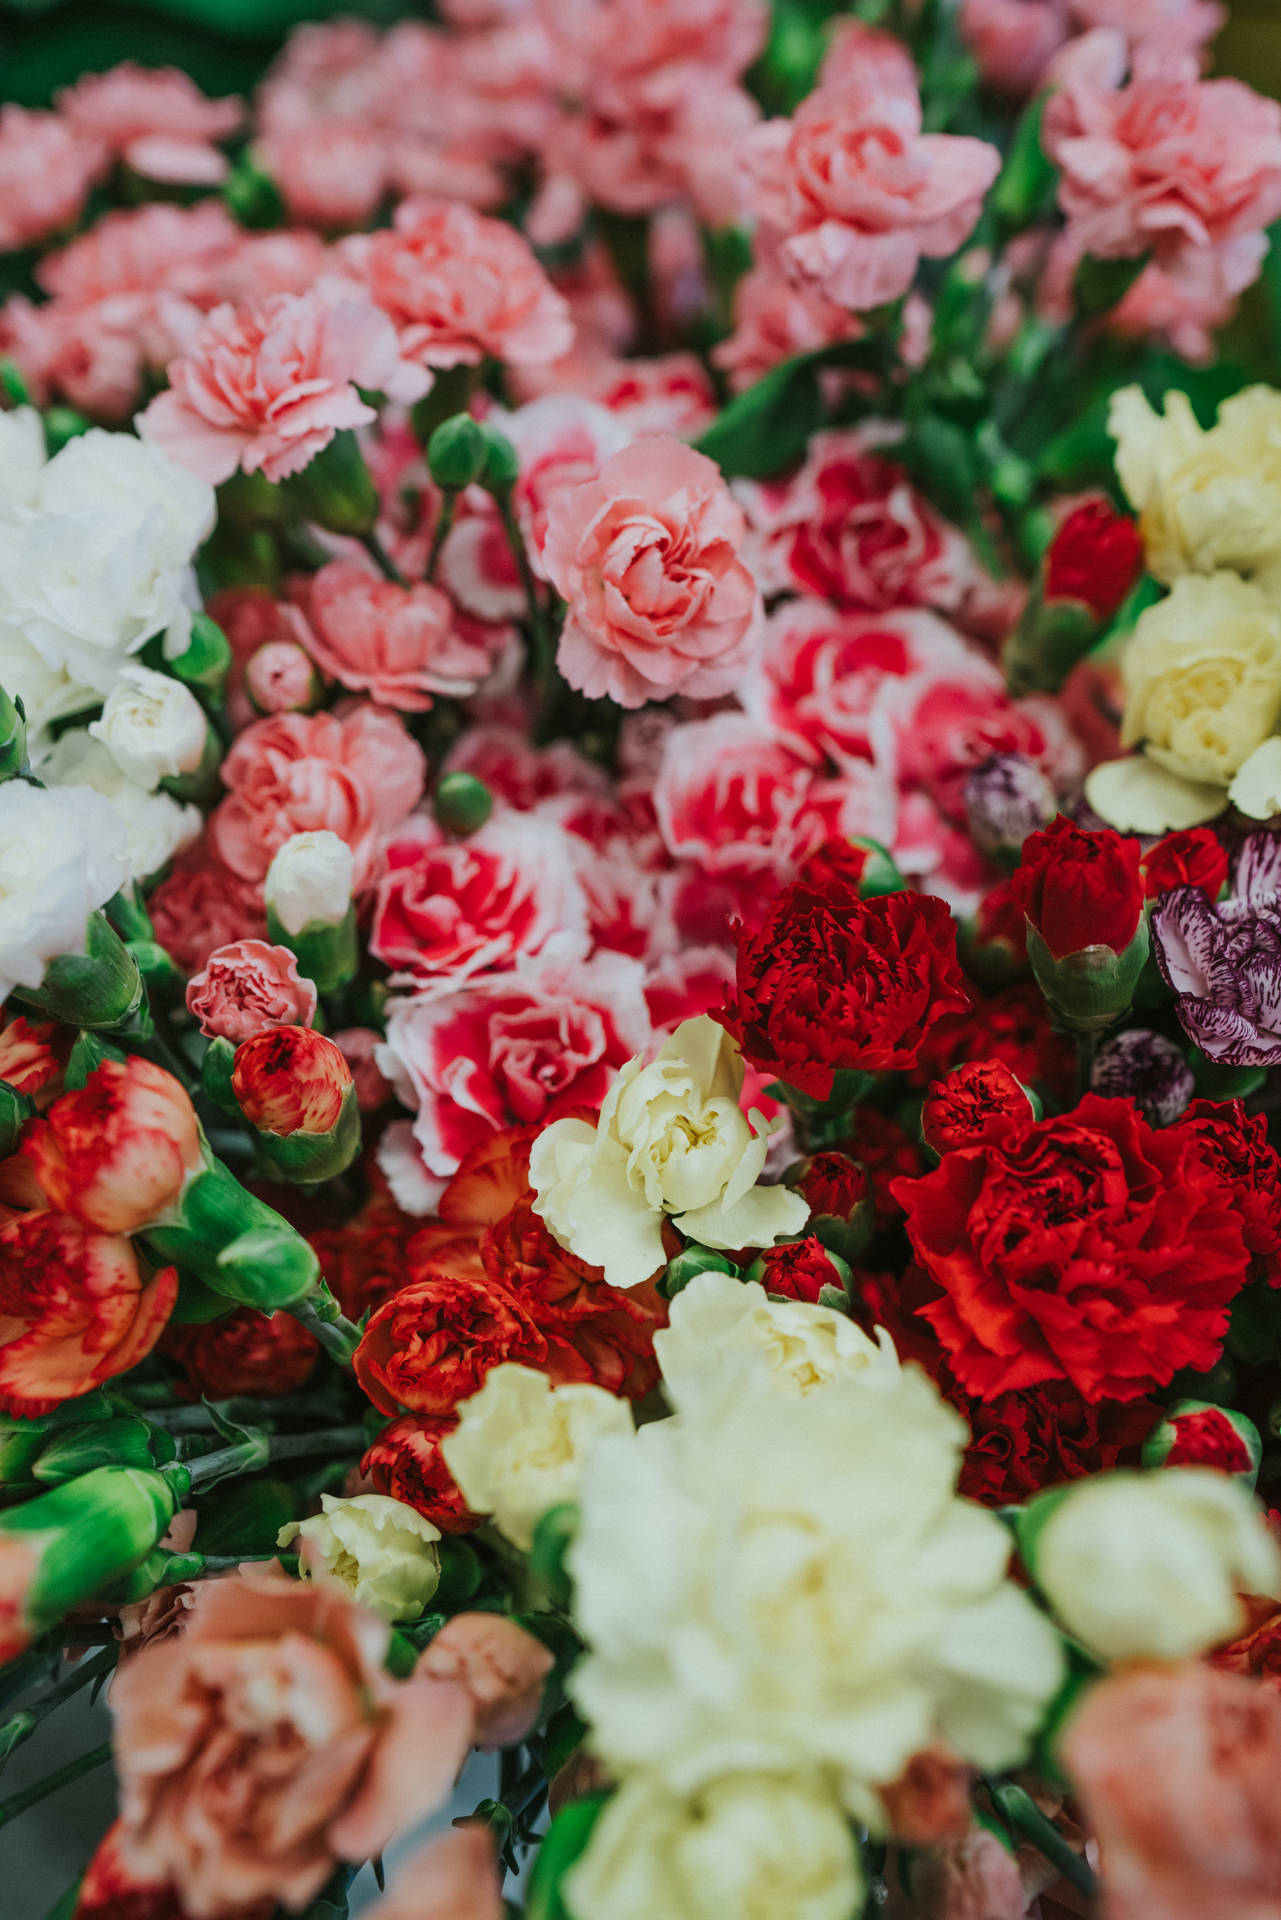 Celebrate Mothers Day with these lovely flowers! Wallpaper